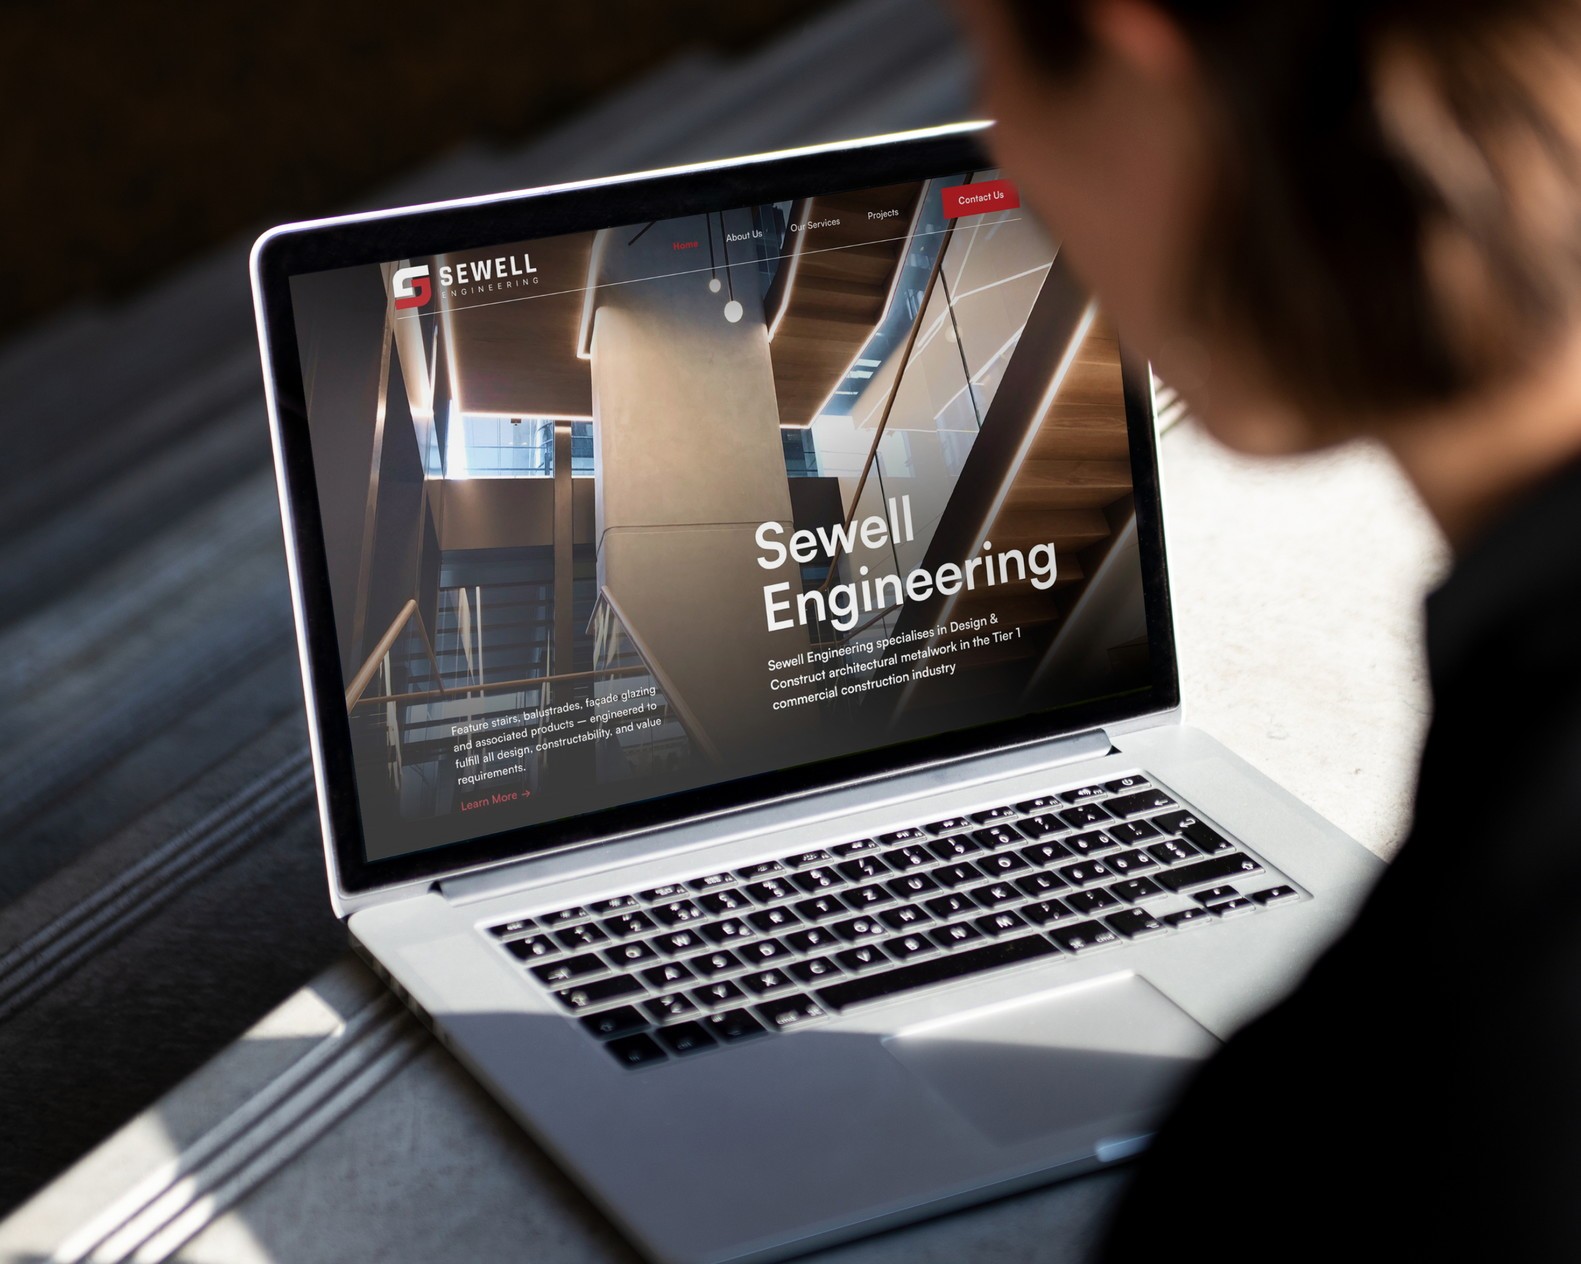 A photo is BrandVillage web design and development project of Sewell Engineering opened in a silver laptop on a wooden desk with a striped pattern. The laptop is open and the screen is visible.